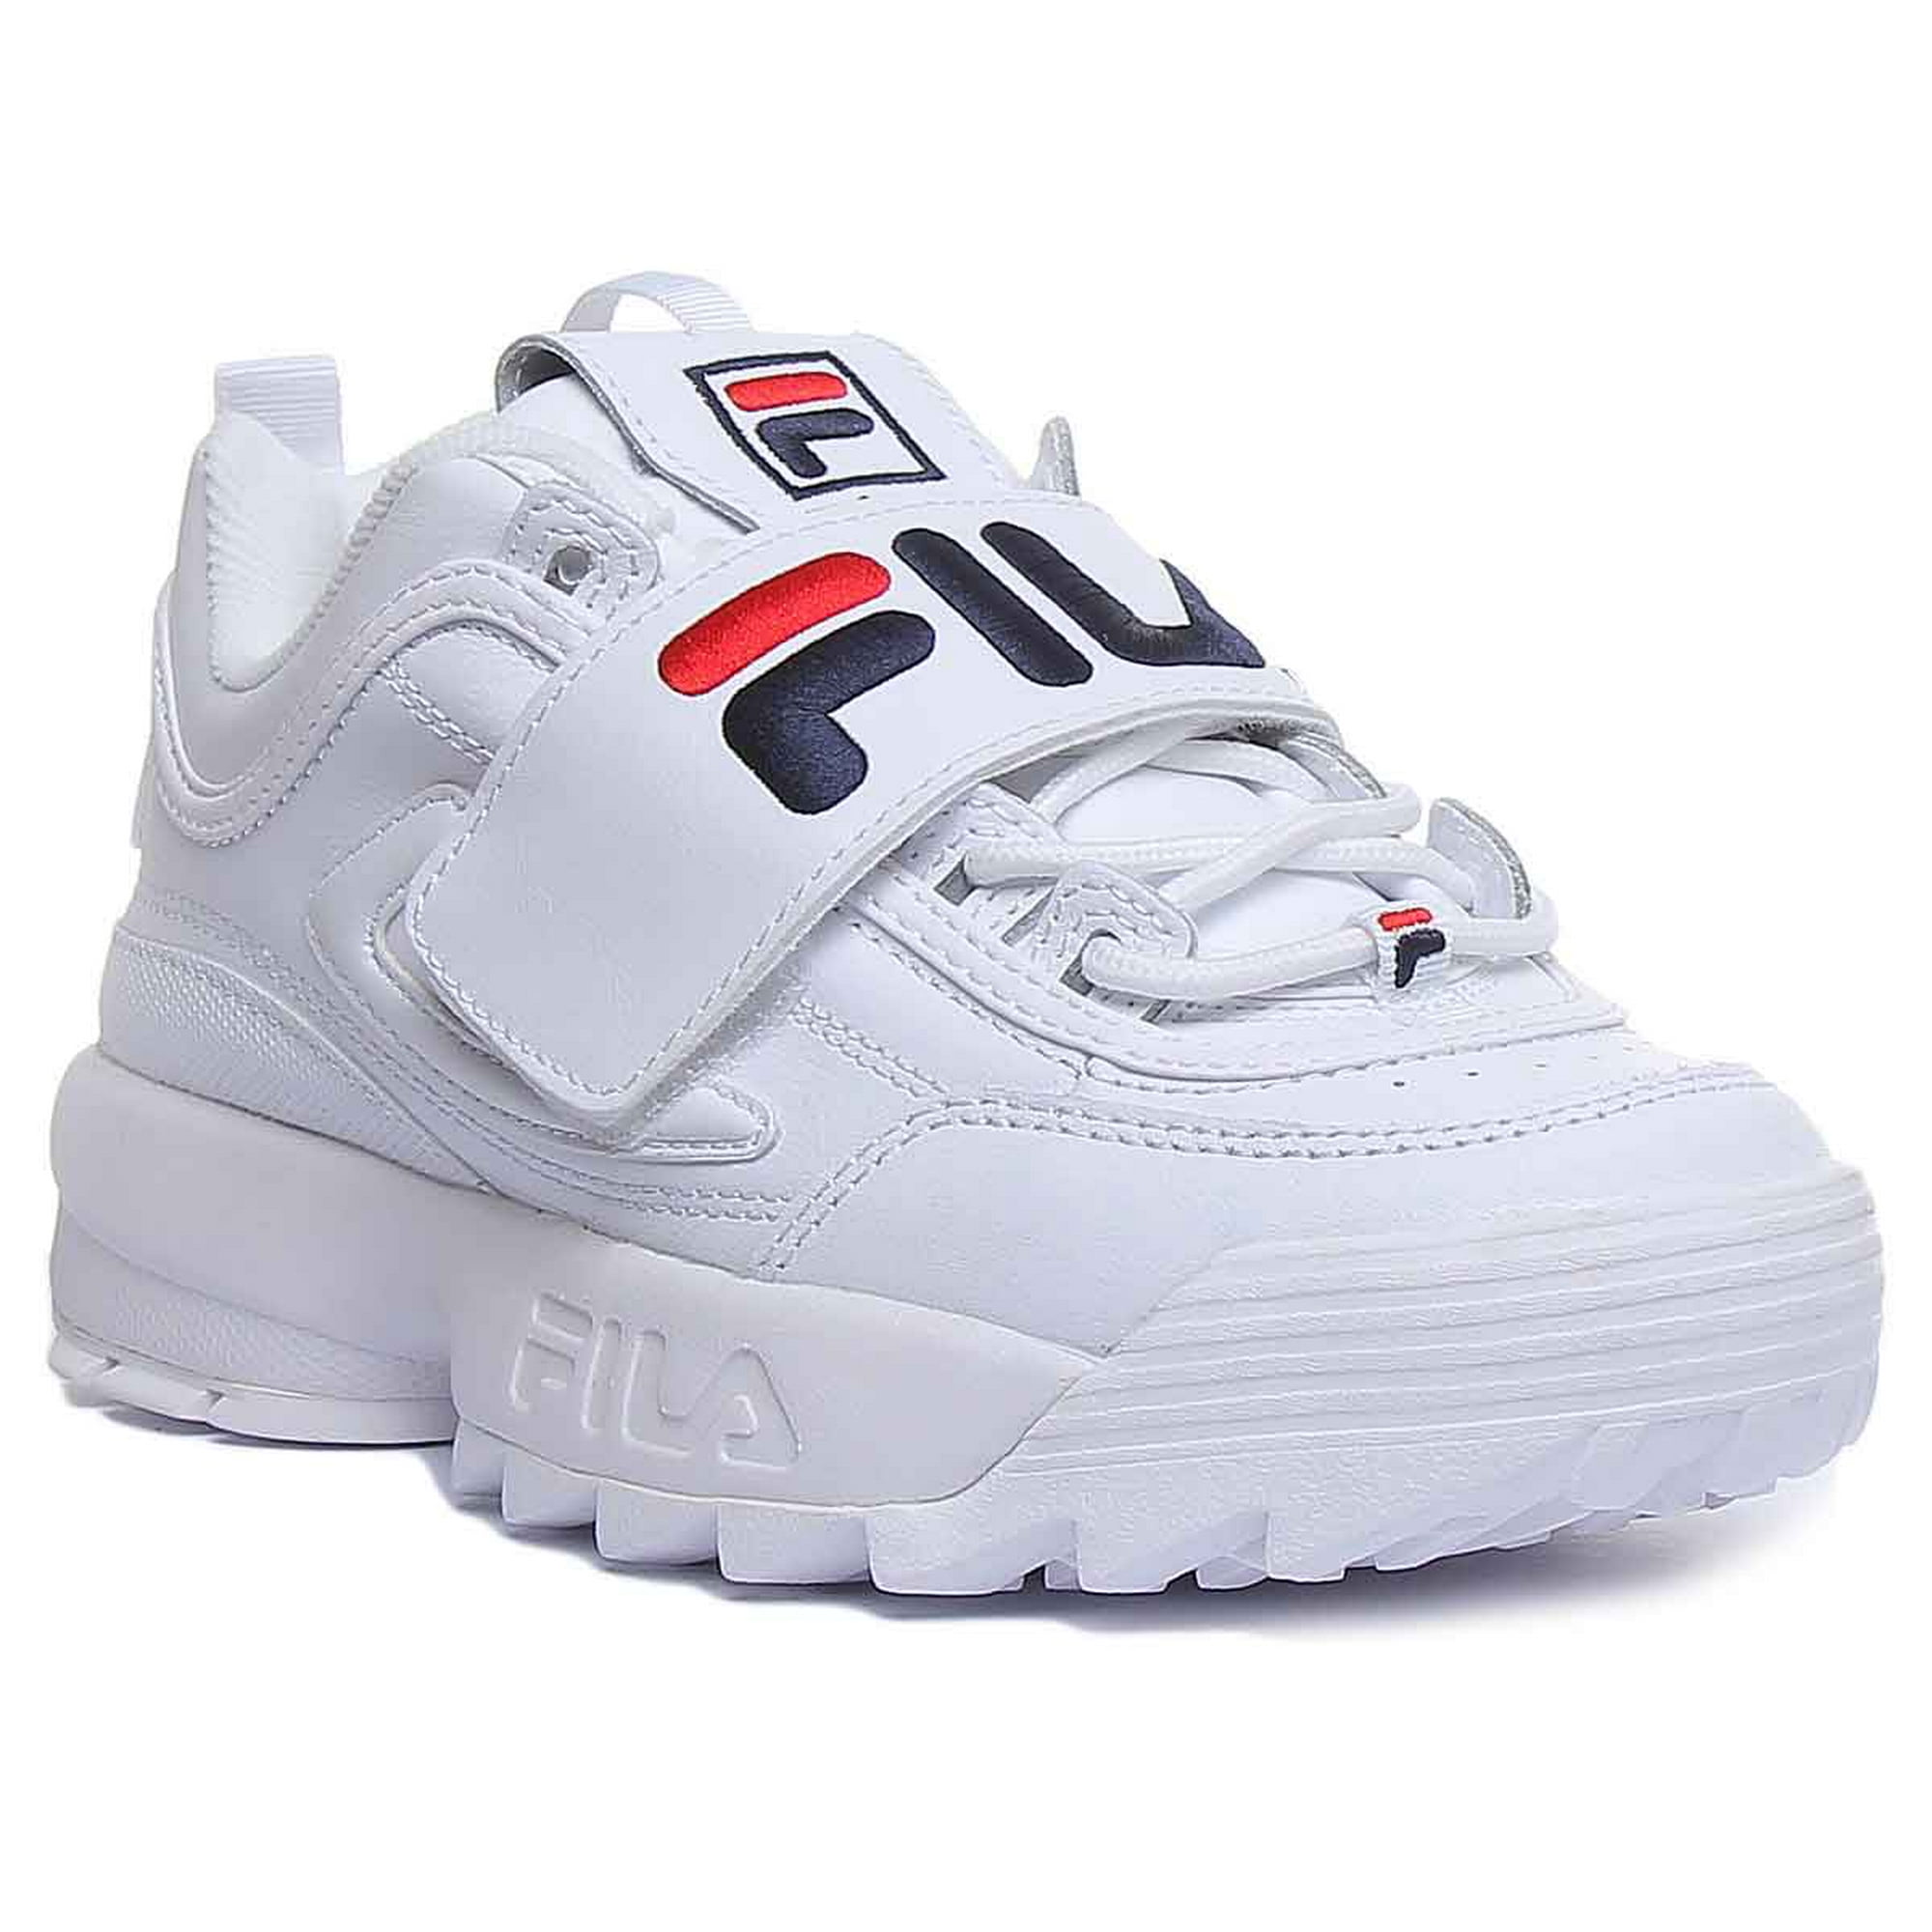 Fila Disruptor 2 Women's Chunky Sole Sneakers In White With Strap Size 6.5 - Walmart.com